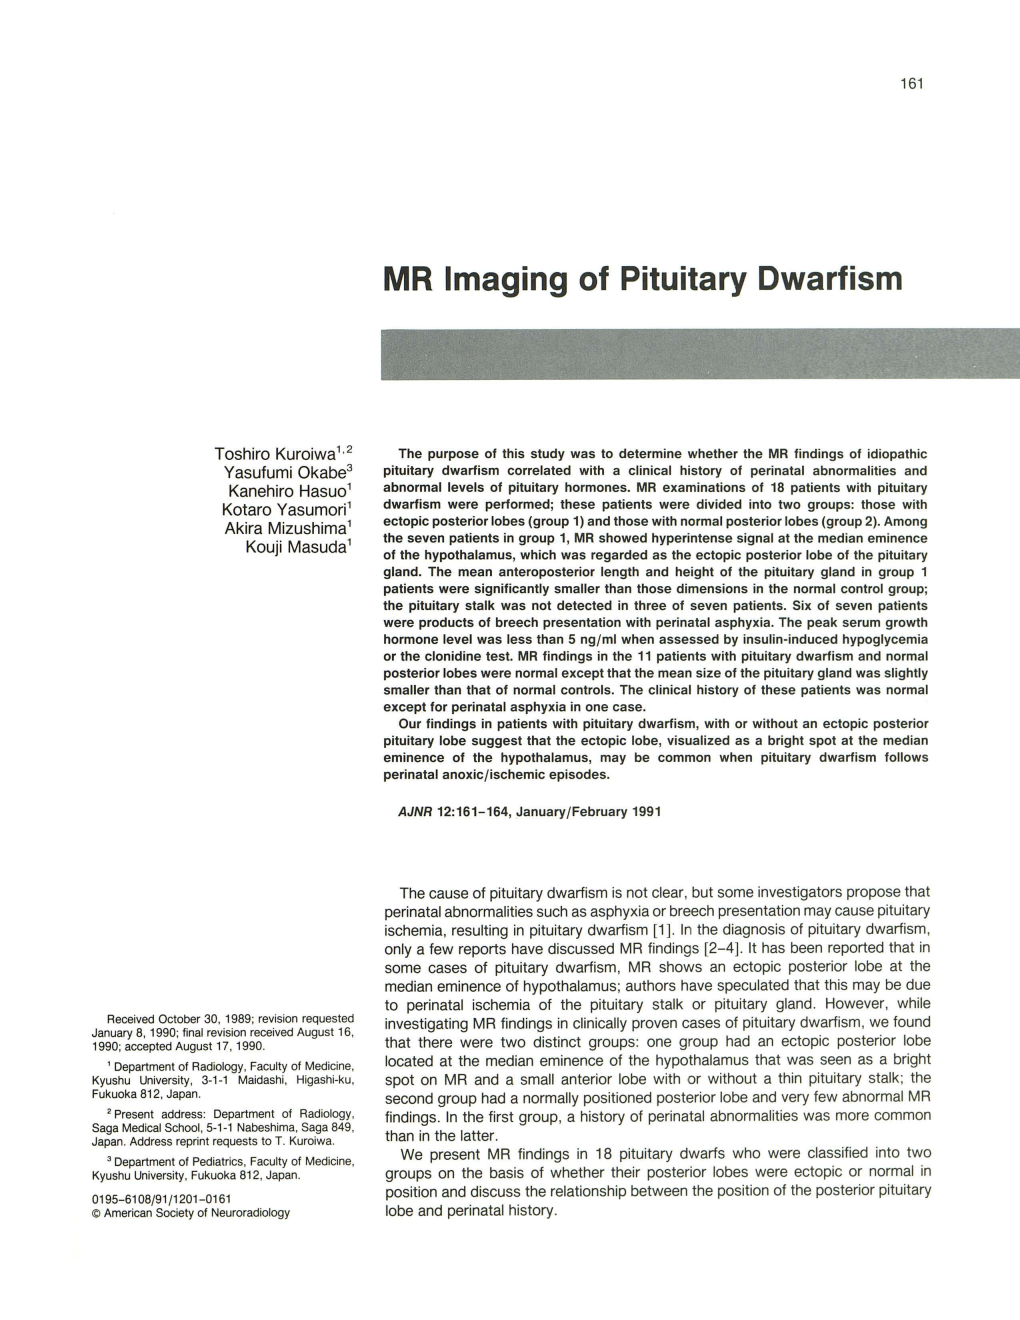 MR Imaging of Pituitary Dwarfism